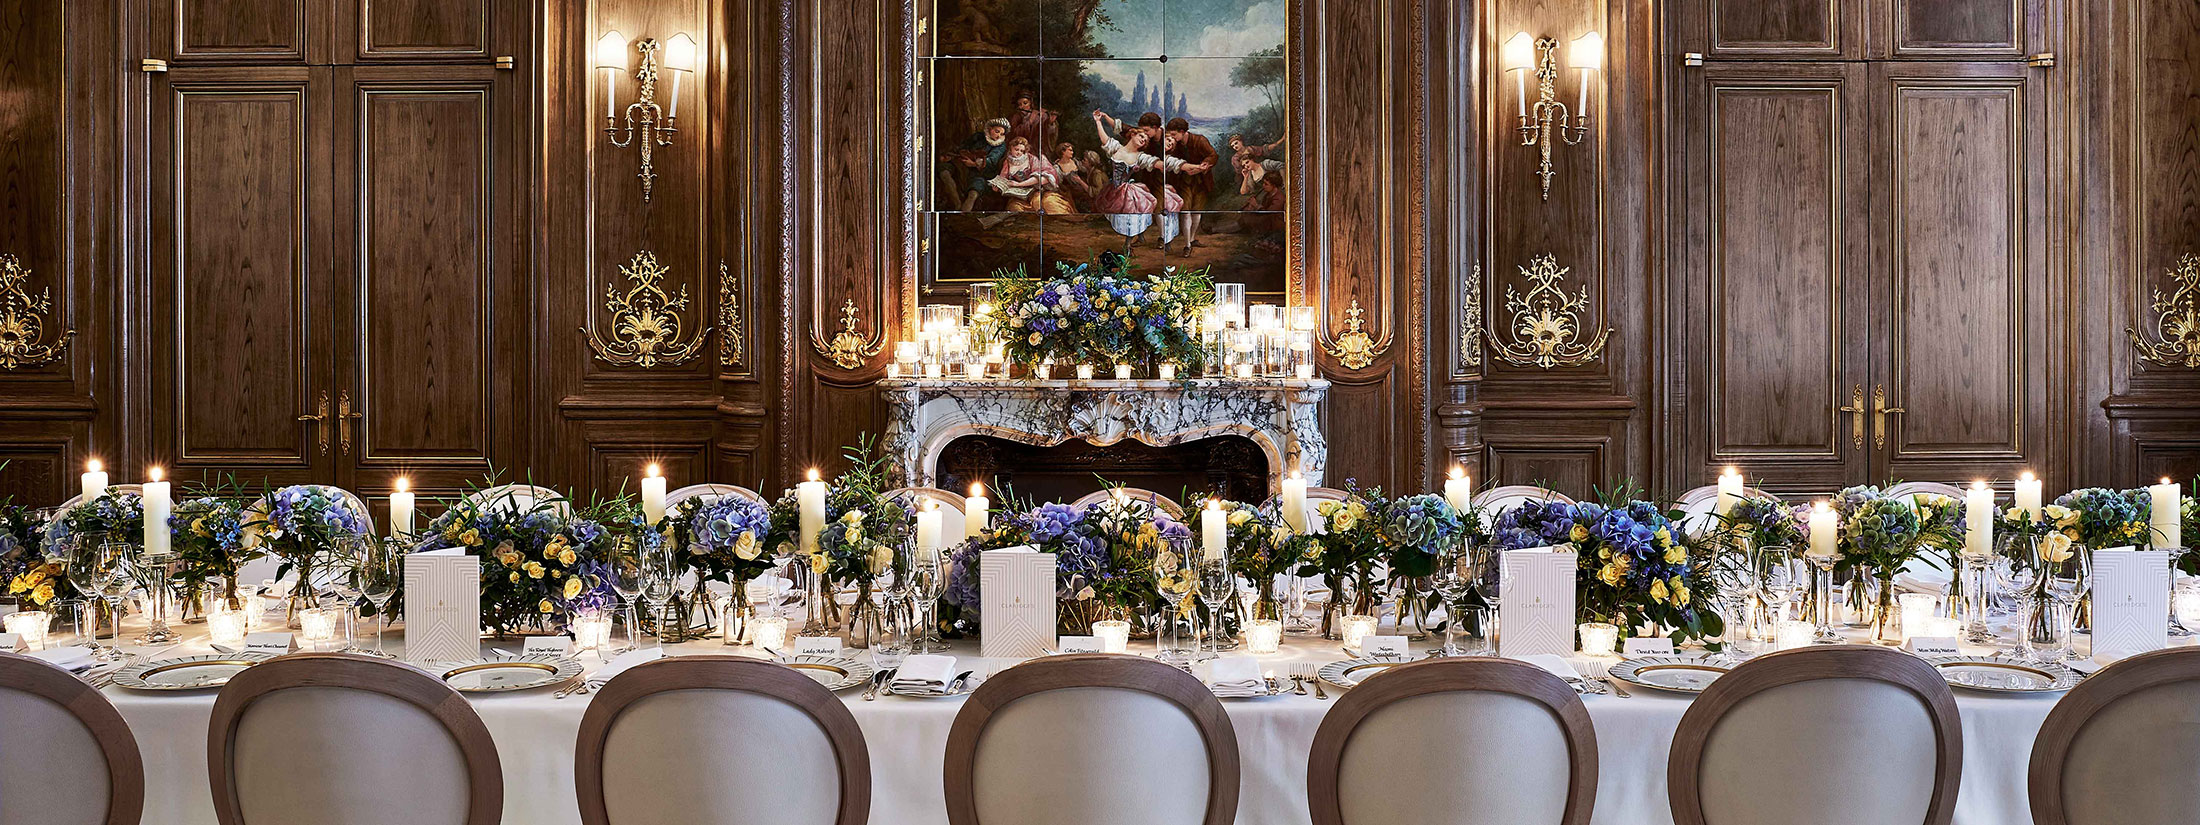 A view of the French Salon transformed for wedding purposes, romantically decorated with flowers and candles.